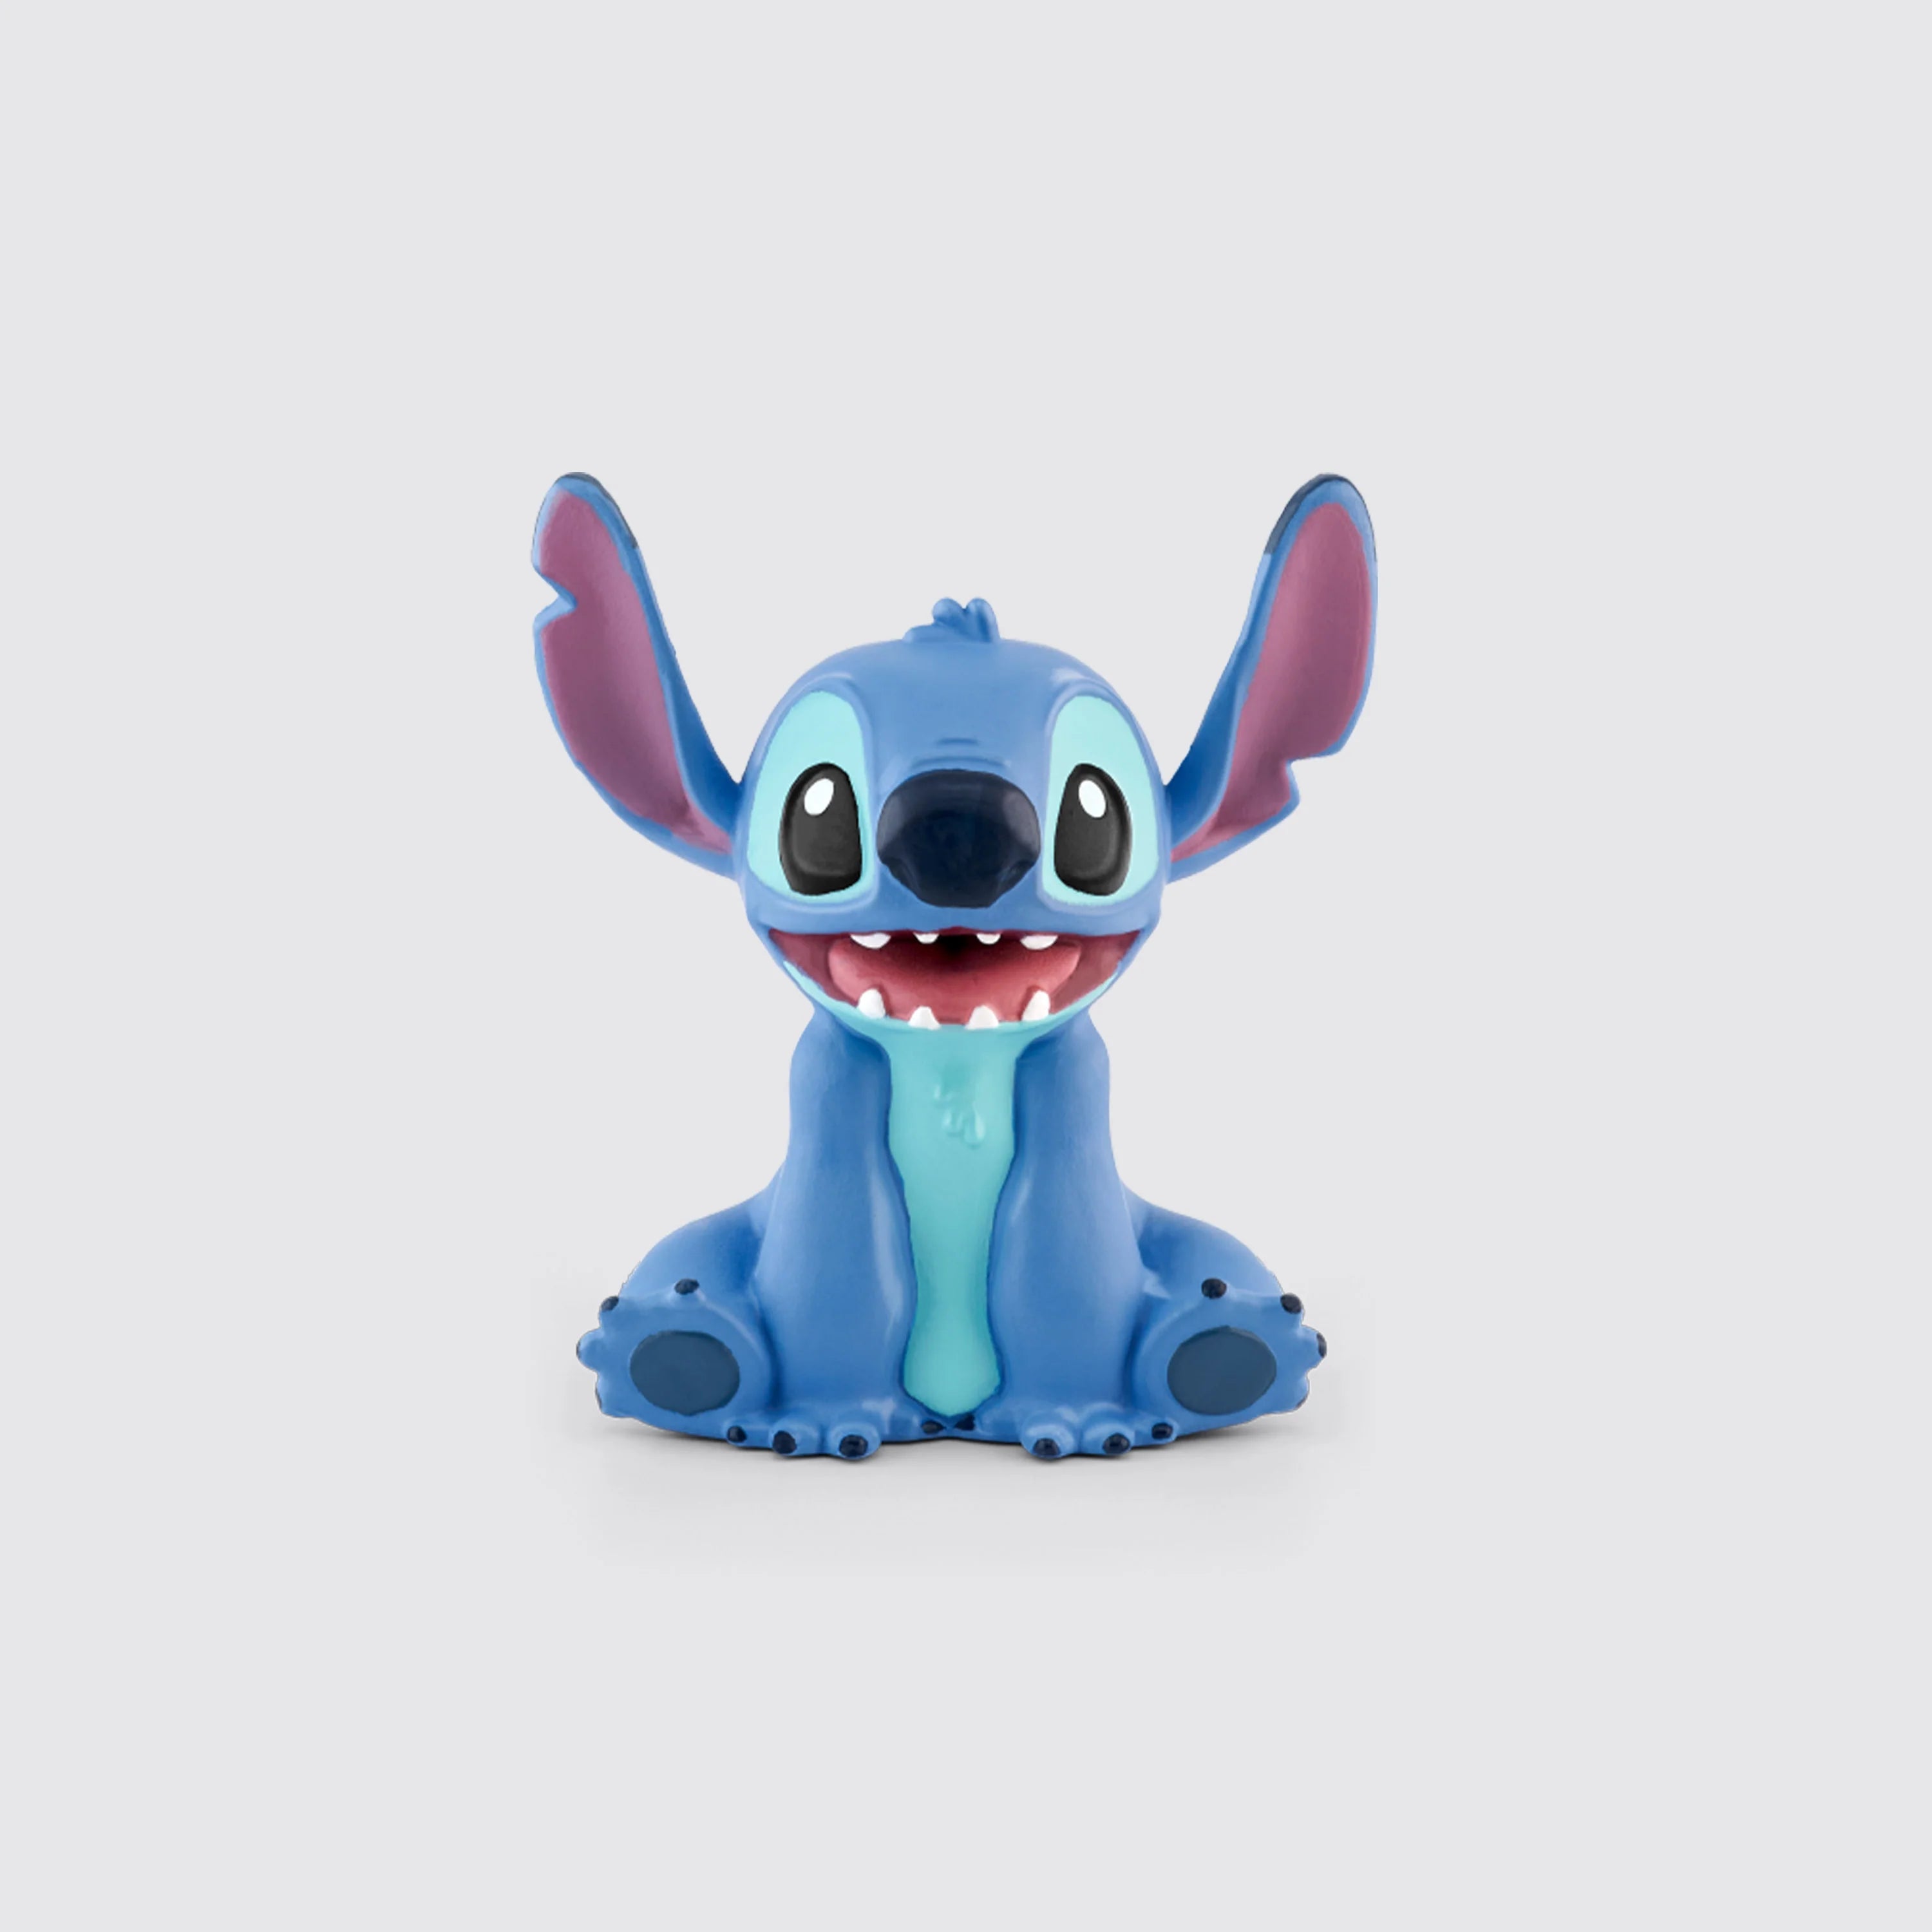 Monopoly Lilo & Stitch Edition - USAopoly 2019 w New Contents